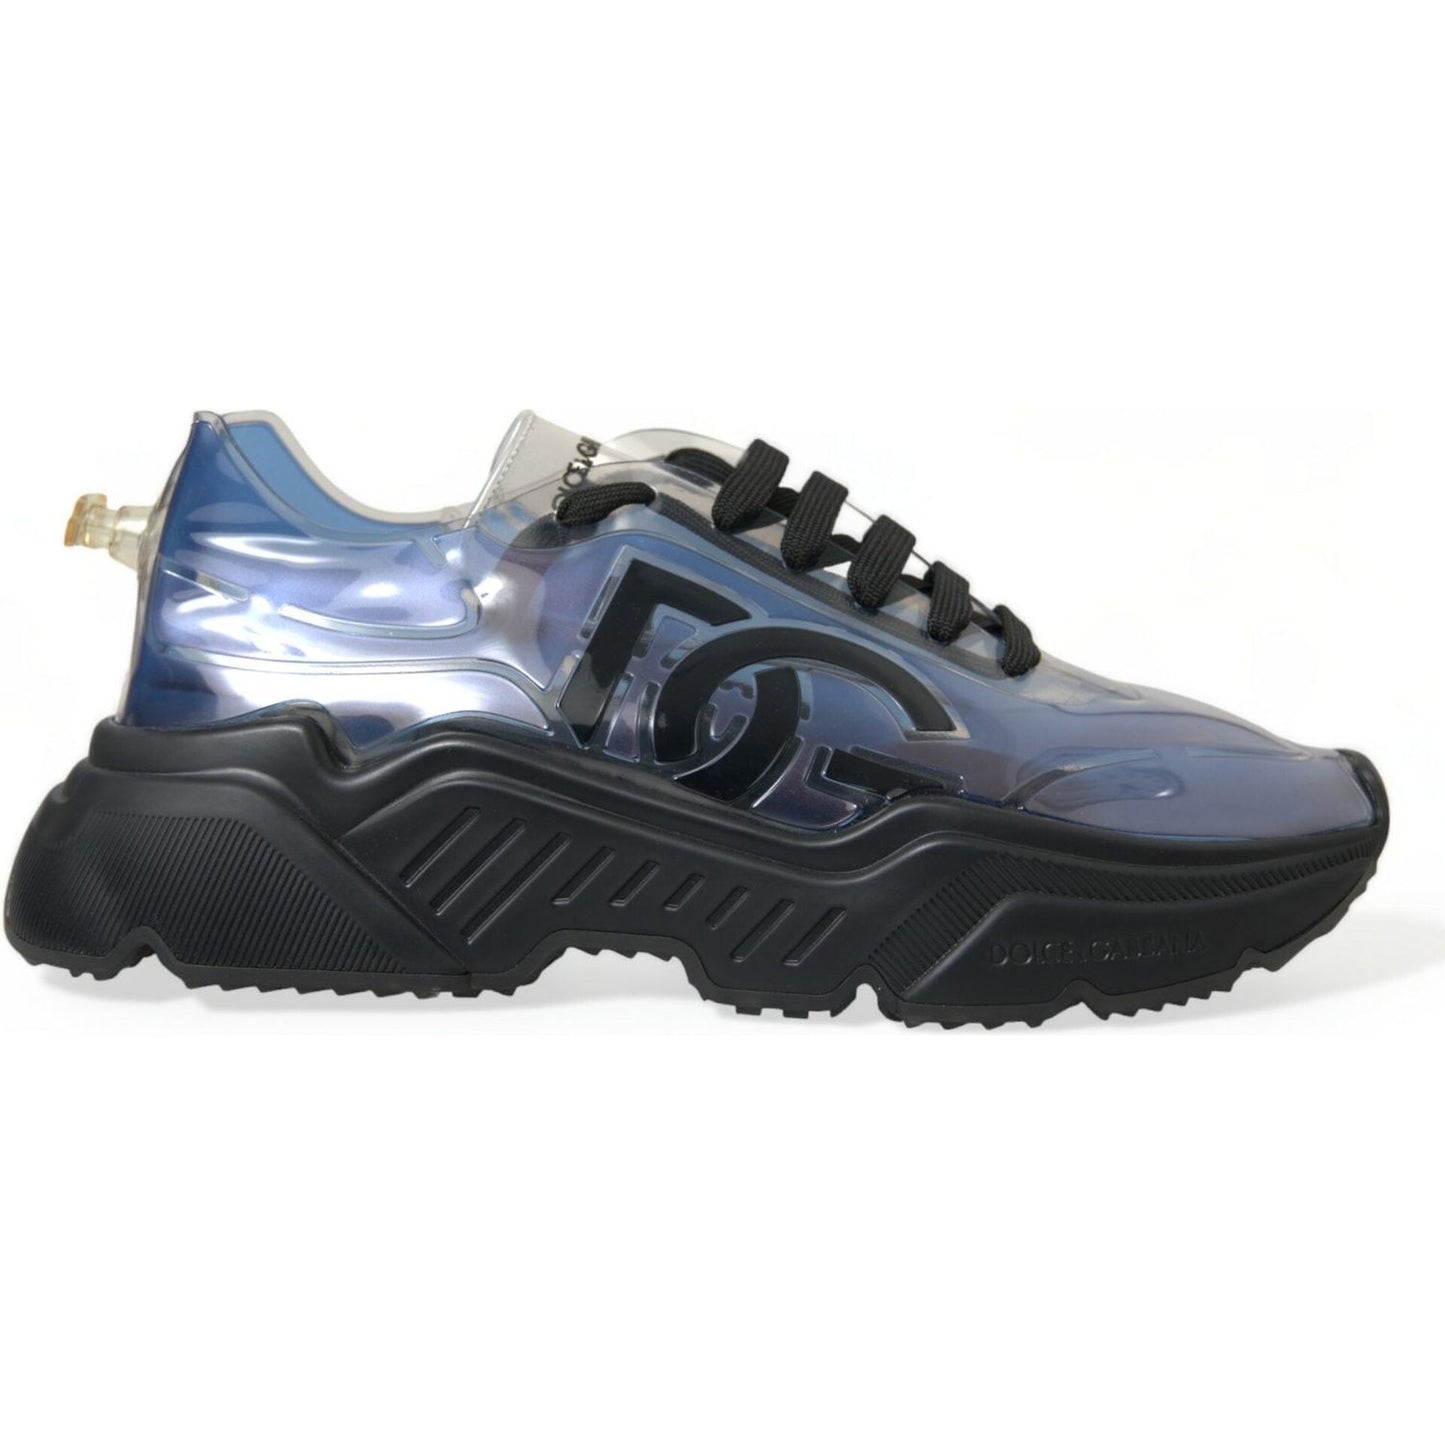 Dolce & Gabbana Elevate Your Style with Chic Blue Sneakers elevate-your-style-with-chic-blue-sneakers